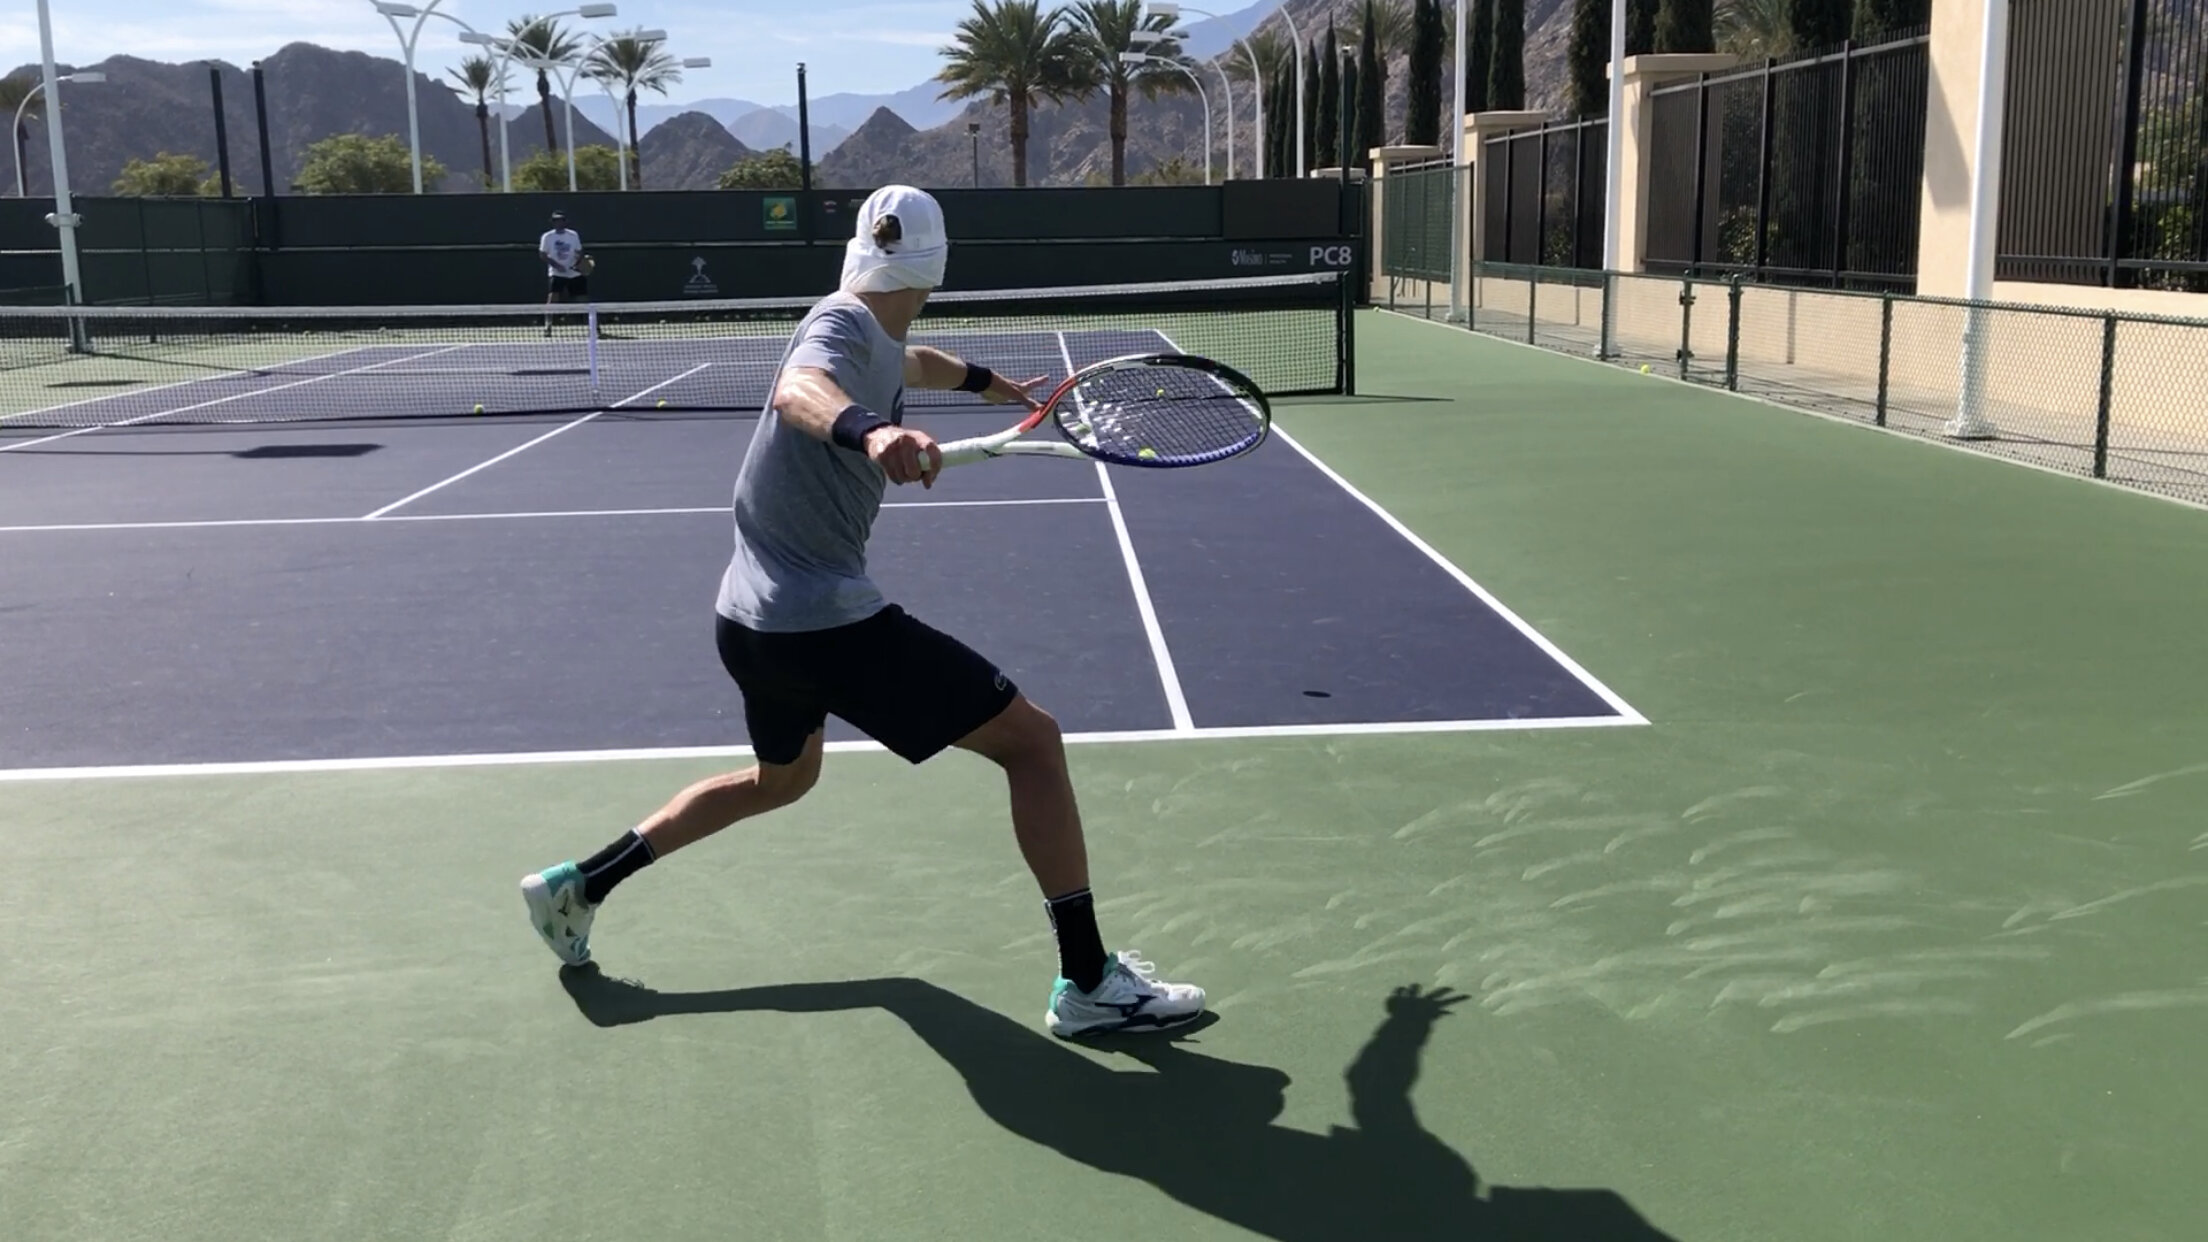 10 Things Ive Learned as a Tennis Performance Coach in 10 Years